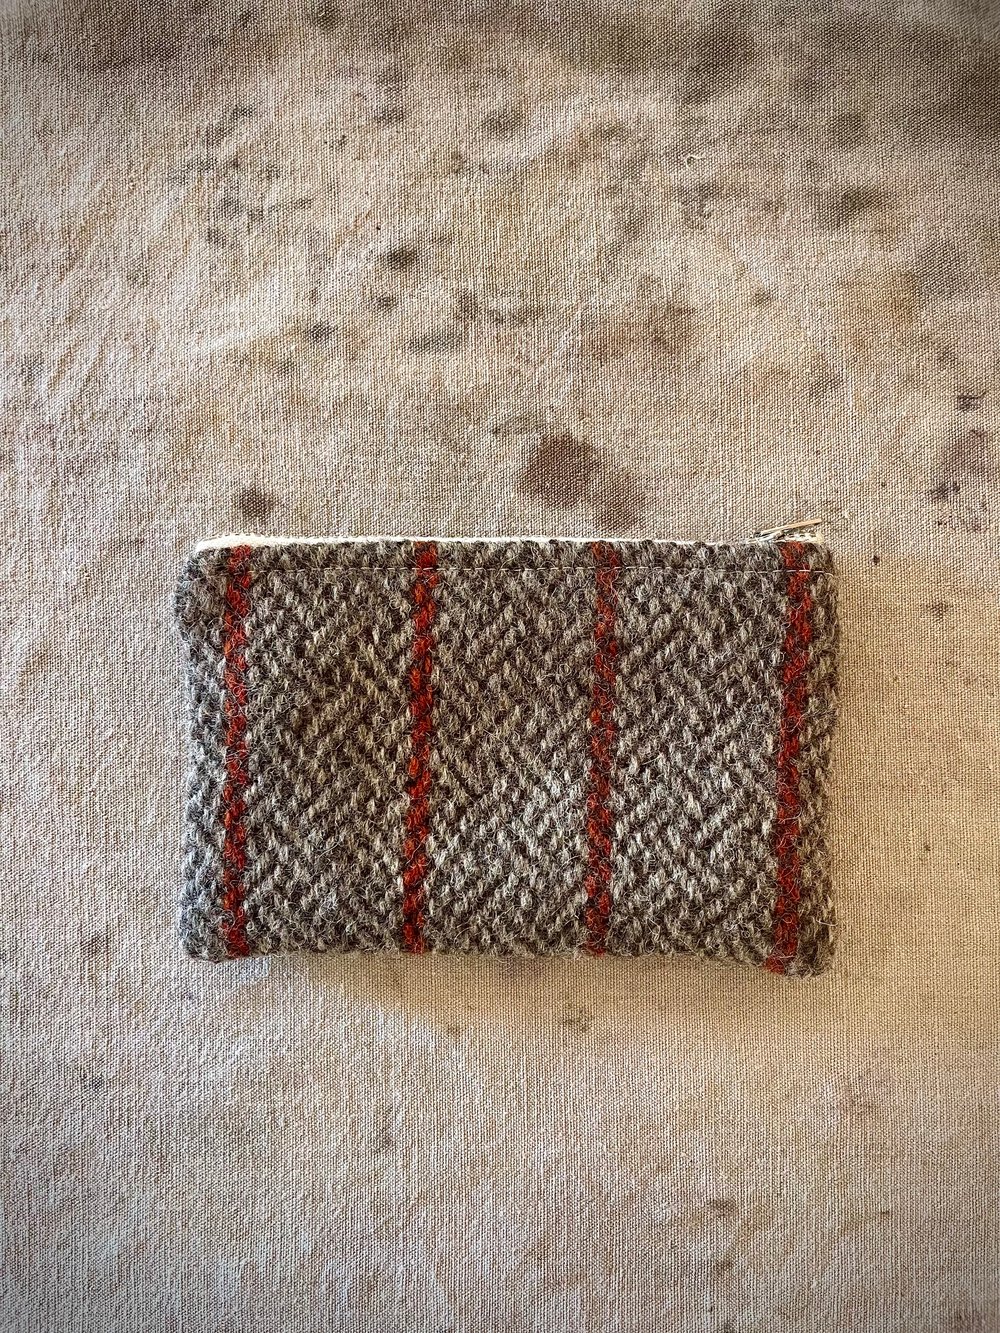 Image of Coin purse